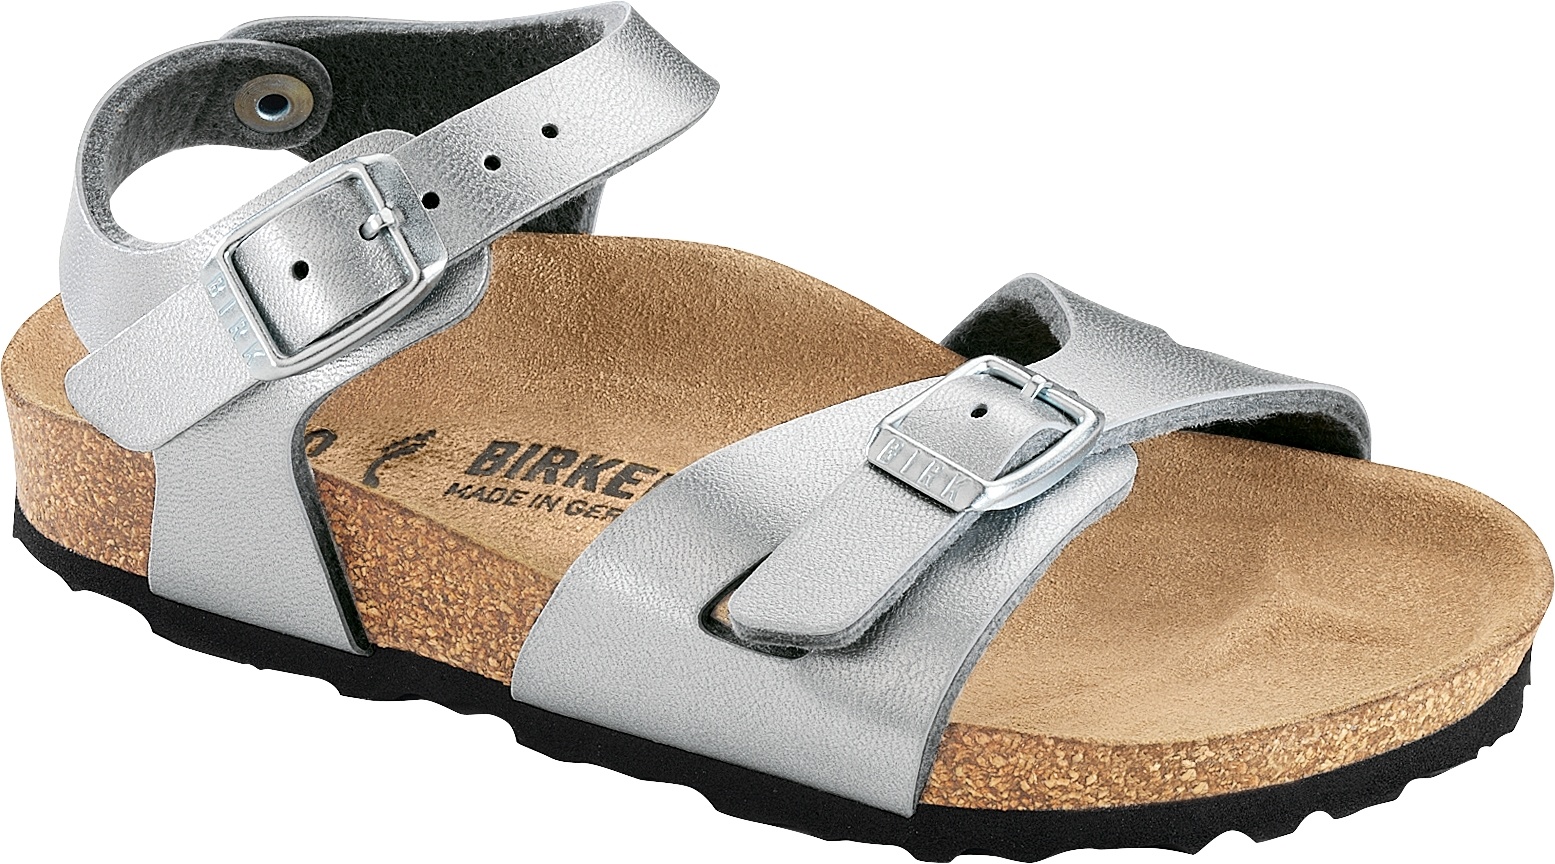 birkenstock rio sandals with ankle straps